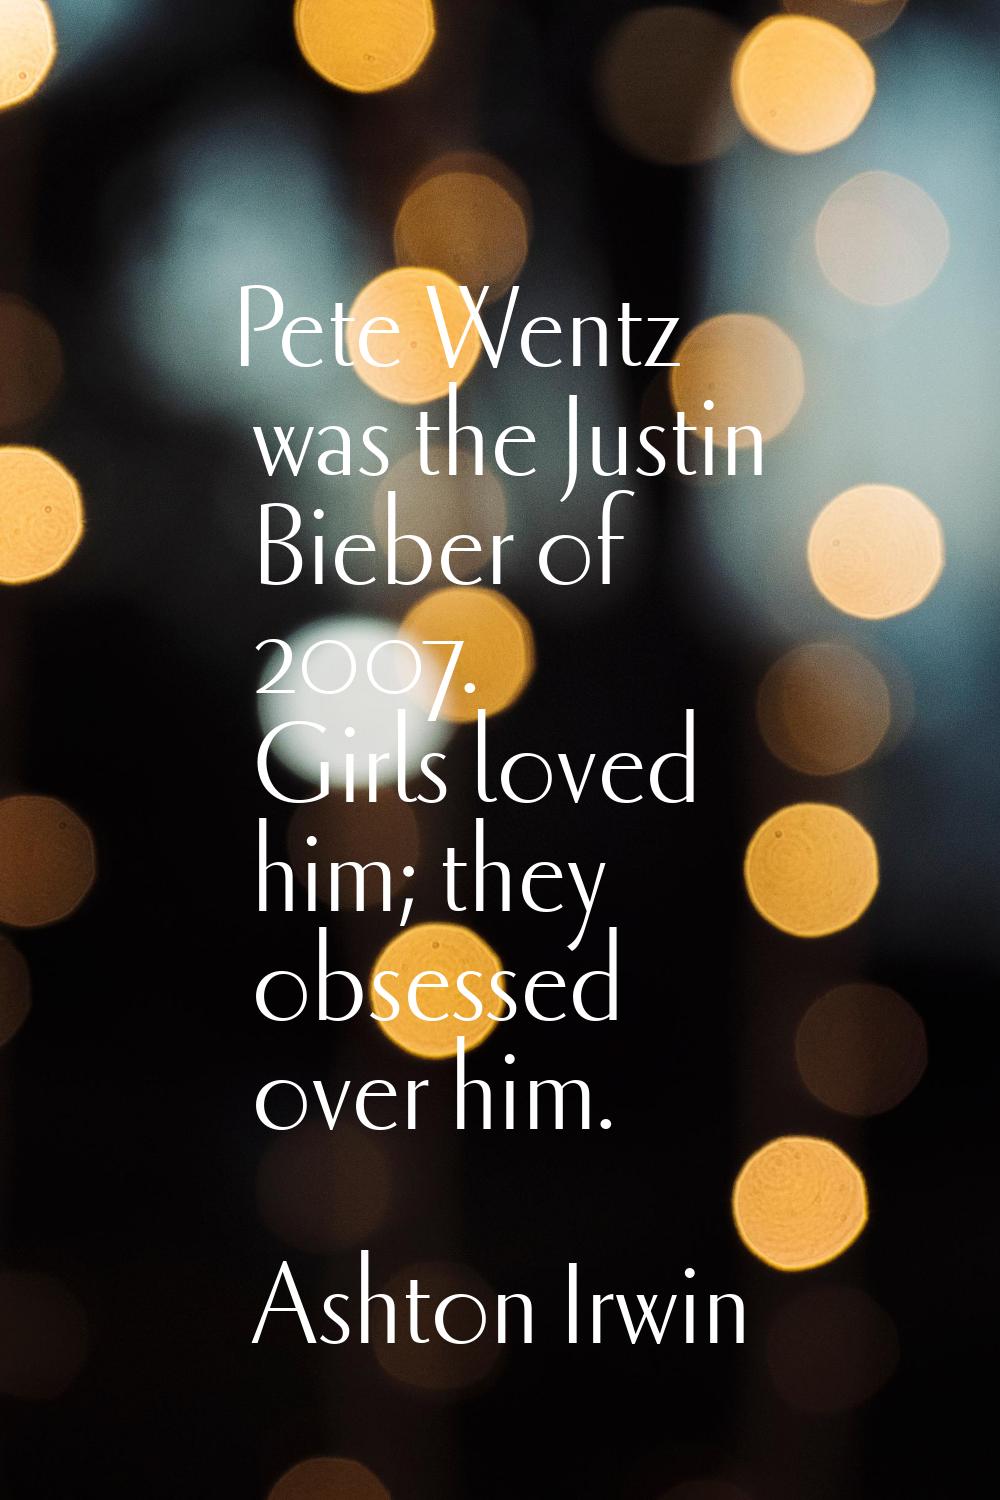 Pete Wentz was the Justin Bieber of 2007. Girls loved him; they obsessed over him.